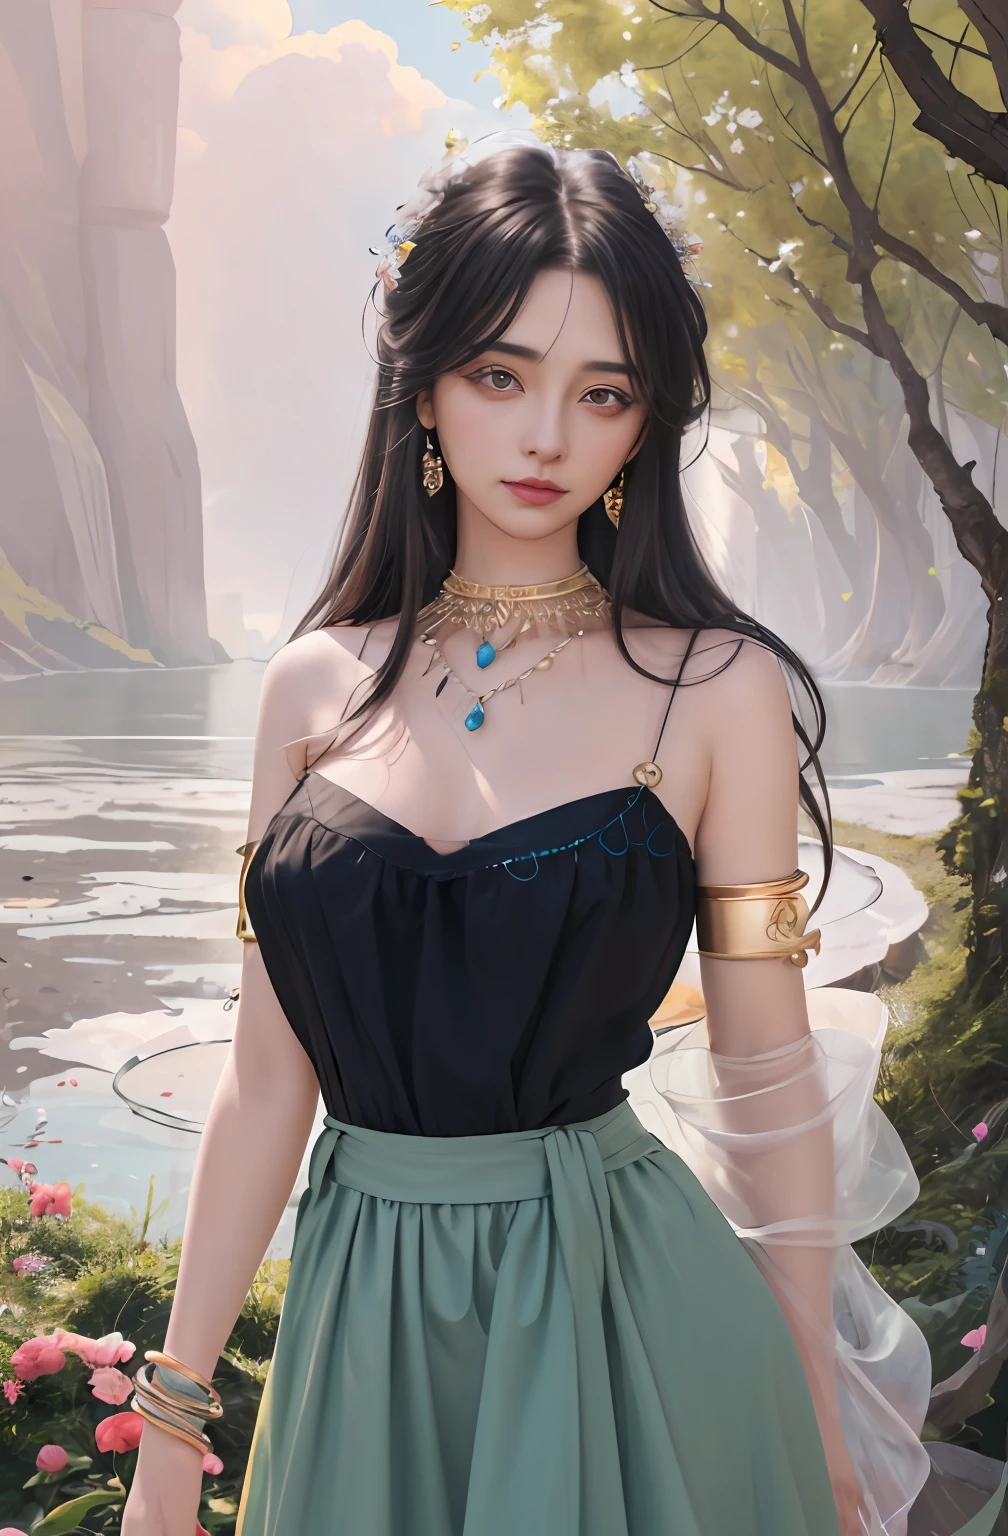 ((Realistic:1.5)),Ulzzang-6500:1.4,((Best quality)), ((Masterpiece)),((Detailed)),2girls,duo,{2 beautiful women}, (Upper body:1.3),Hug and touch each other, Tease your friend's waist, Breathless friends, Biting a friend's earlobe, crouched,super wide shot,Face focus, Long legs,Curvy, Barefoot,Wide hips, Thin legs, Oversized eyes,Long eyelashes, (Detailed face,beautidful eyes, detailedpupils,detailed clothes features, Clear background:1.3), (armlets, bangle:1.3), Mysterious ancient ruins, floresta exuberante, Deep canyon,bridge,River,cliff,Cloud,lakes,Rock music,Waterfalls, Flowers, Grass,grape trees,tree,bright detail,Sharp,Perfect compounding, Intricate, Sharp focus, Dramatic,